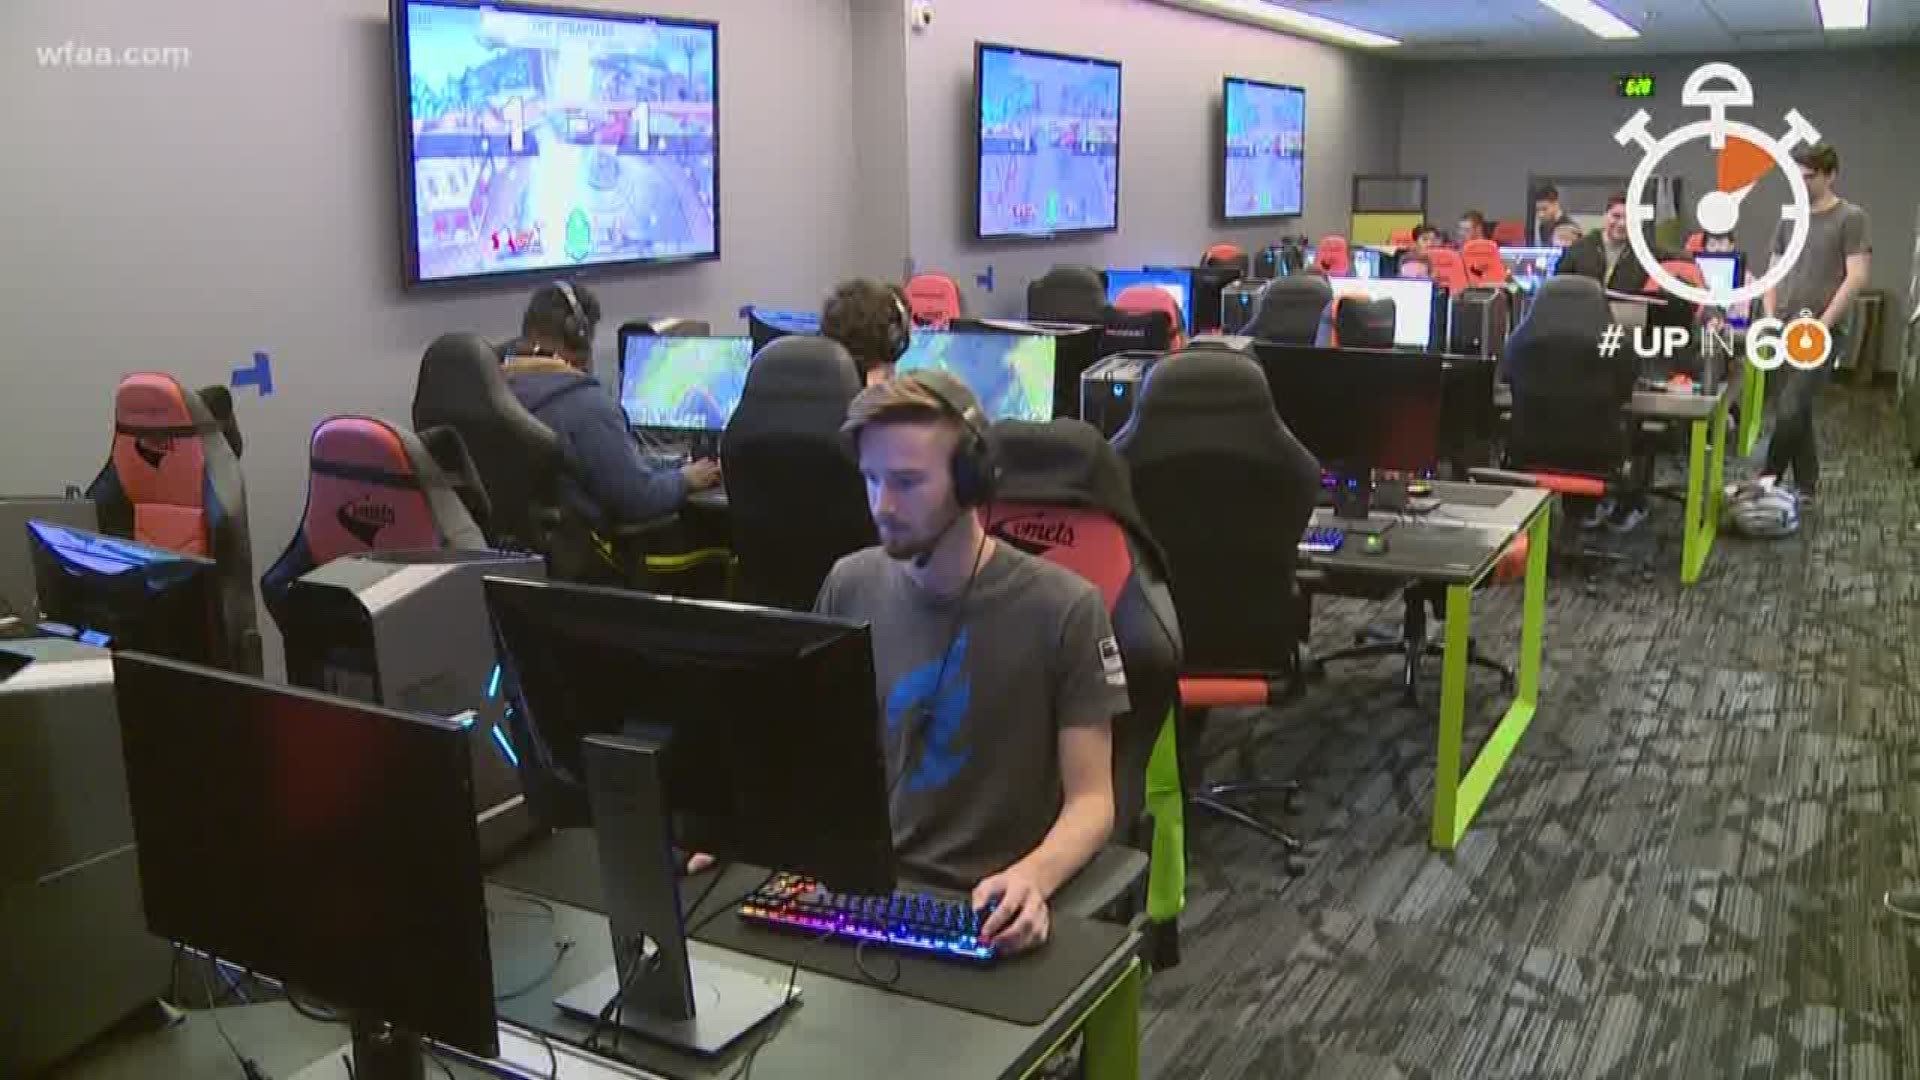 Up in 60: Are gamers the new athlete? UT Dallas program enters competitive world of eSports